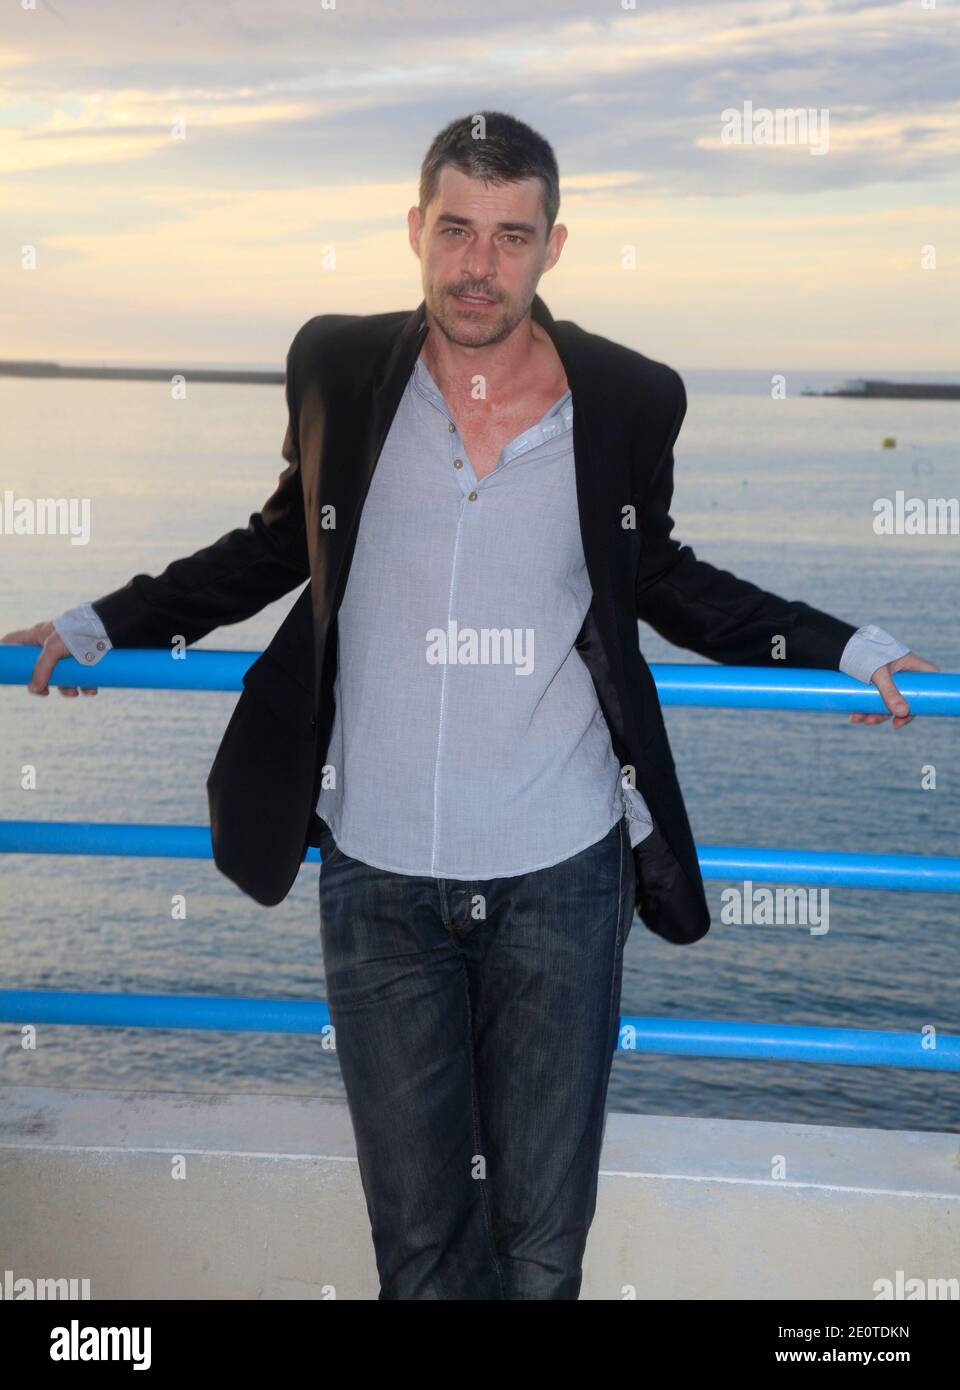 Jury's member Thierry Neuvic poses for photographers during the opening of the 17th Young Directors International Film Festival in Saint-Jean-de-Luz, France on October 09, 2012. Photo by Jerome Domine/ABACAPRESS.COM Stock Photo